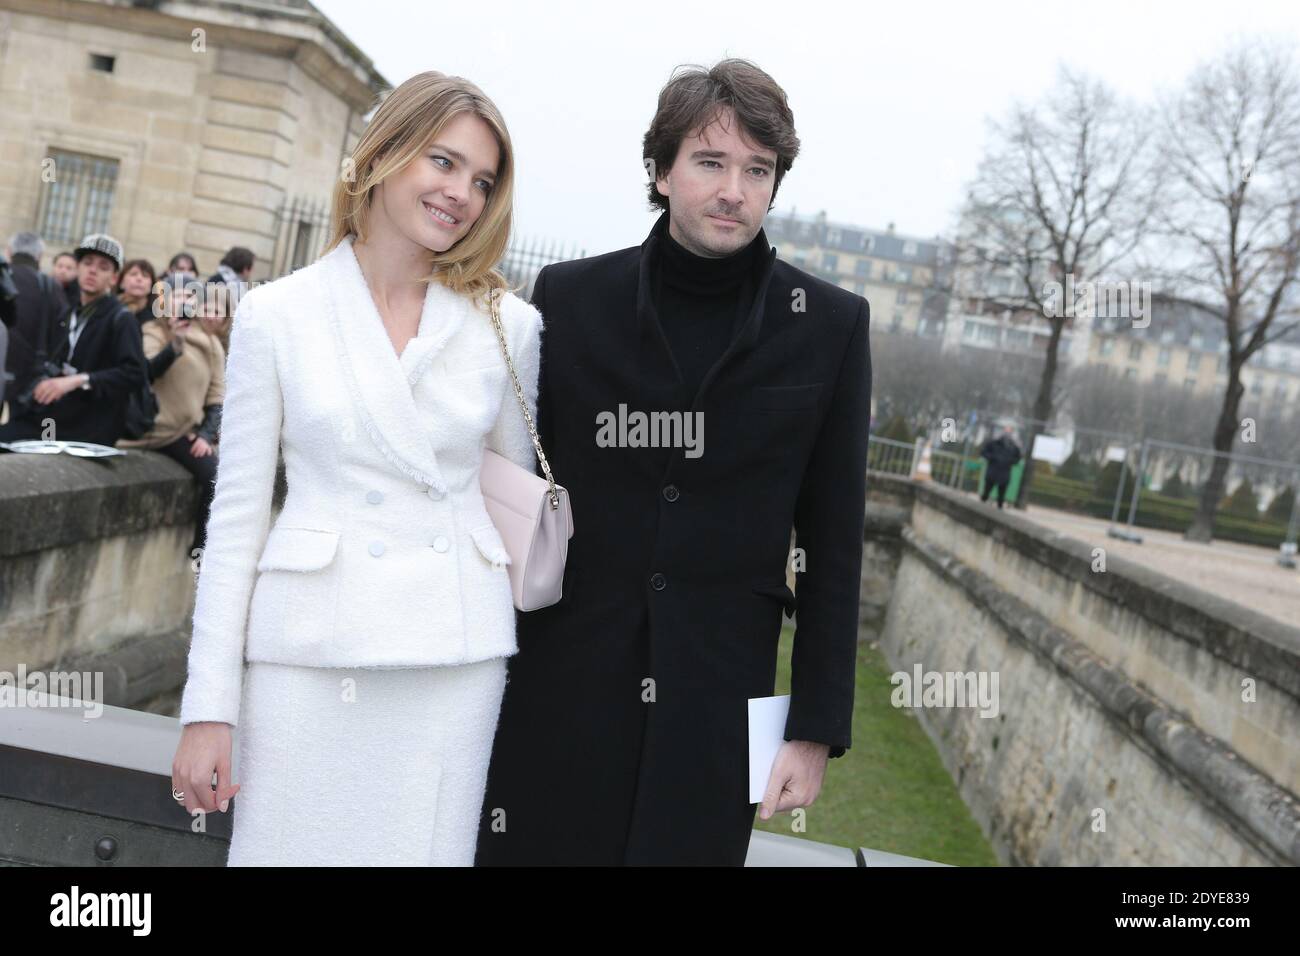 Bernard Arnault, Alexandre Arnault and Natalia Vodianova attending the Louis  Vuitton Menswear Fall/Winter 2019-2020 show as part of Paris Fashion Week  in Paris, France on January 17, 2019. Photo by Jerome Domine/ABACAPRESS.COM